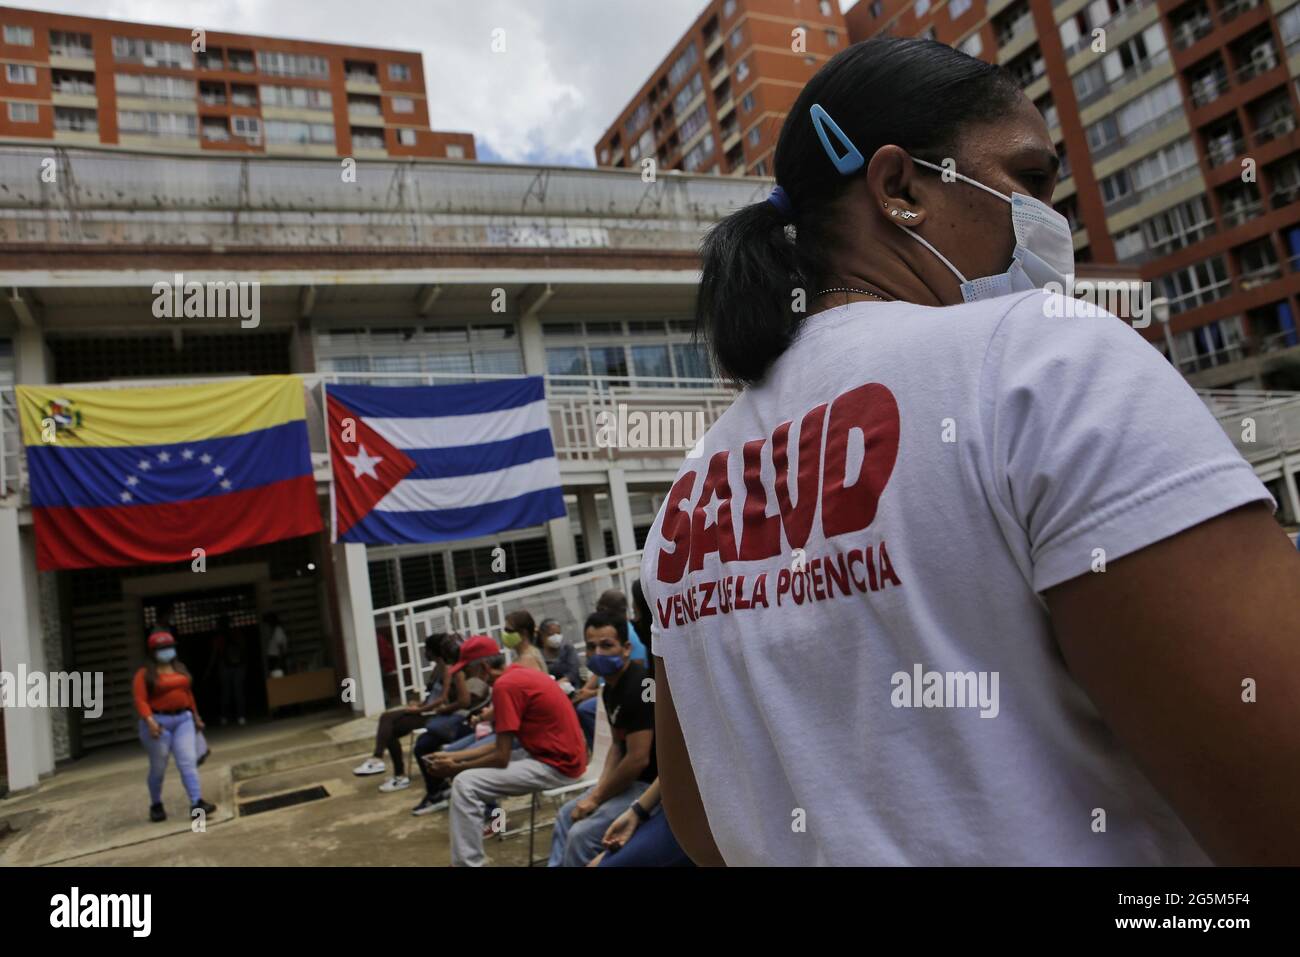 Caracas, Venezuela. 28th June, 2021. People wait outside an establishment with the Venezuelan and Cuban flags on its façade, where they are to receive the Cuban Corona vaccine, Abdala. The first shipment of vaccine from Cuba will give 10,000 people in Venezuela their first dose of the vaccine, according to Cuban authorities. Credit: Jesus Vargas/dpa/Alamy Live News Stock Photo